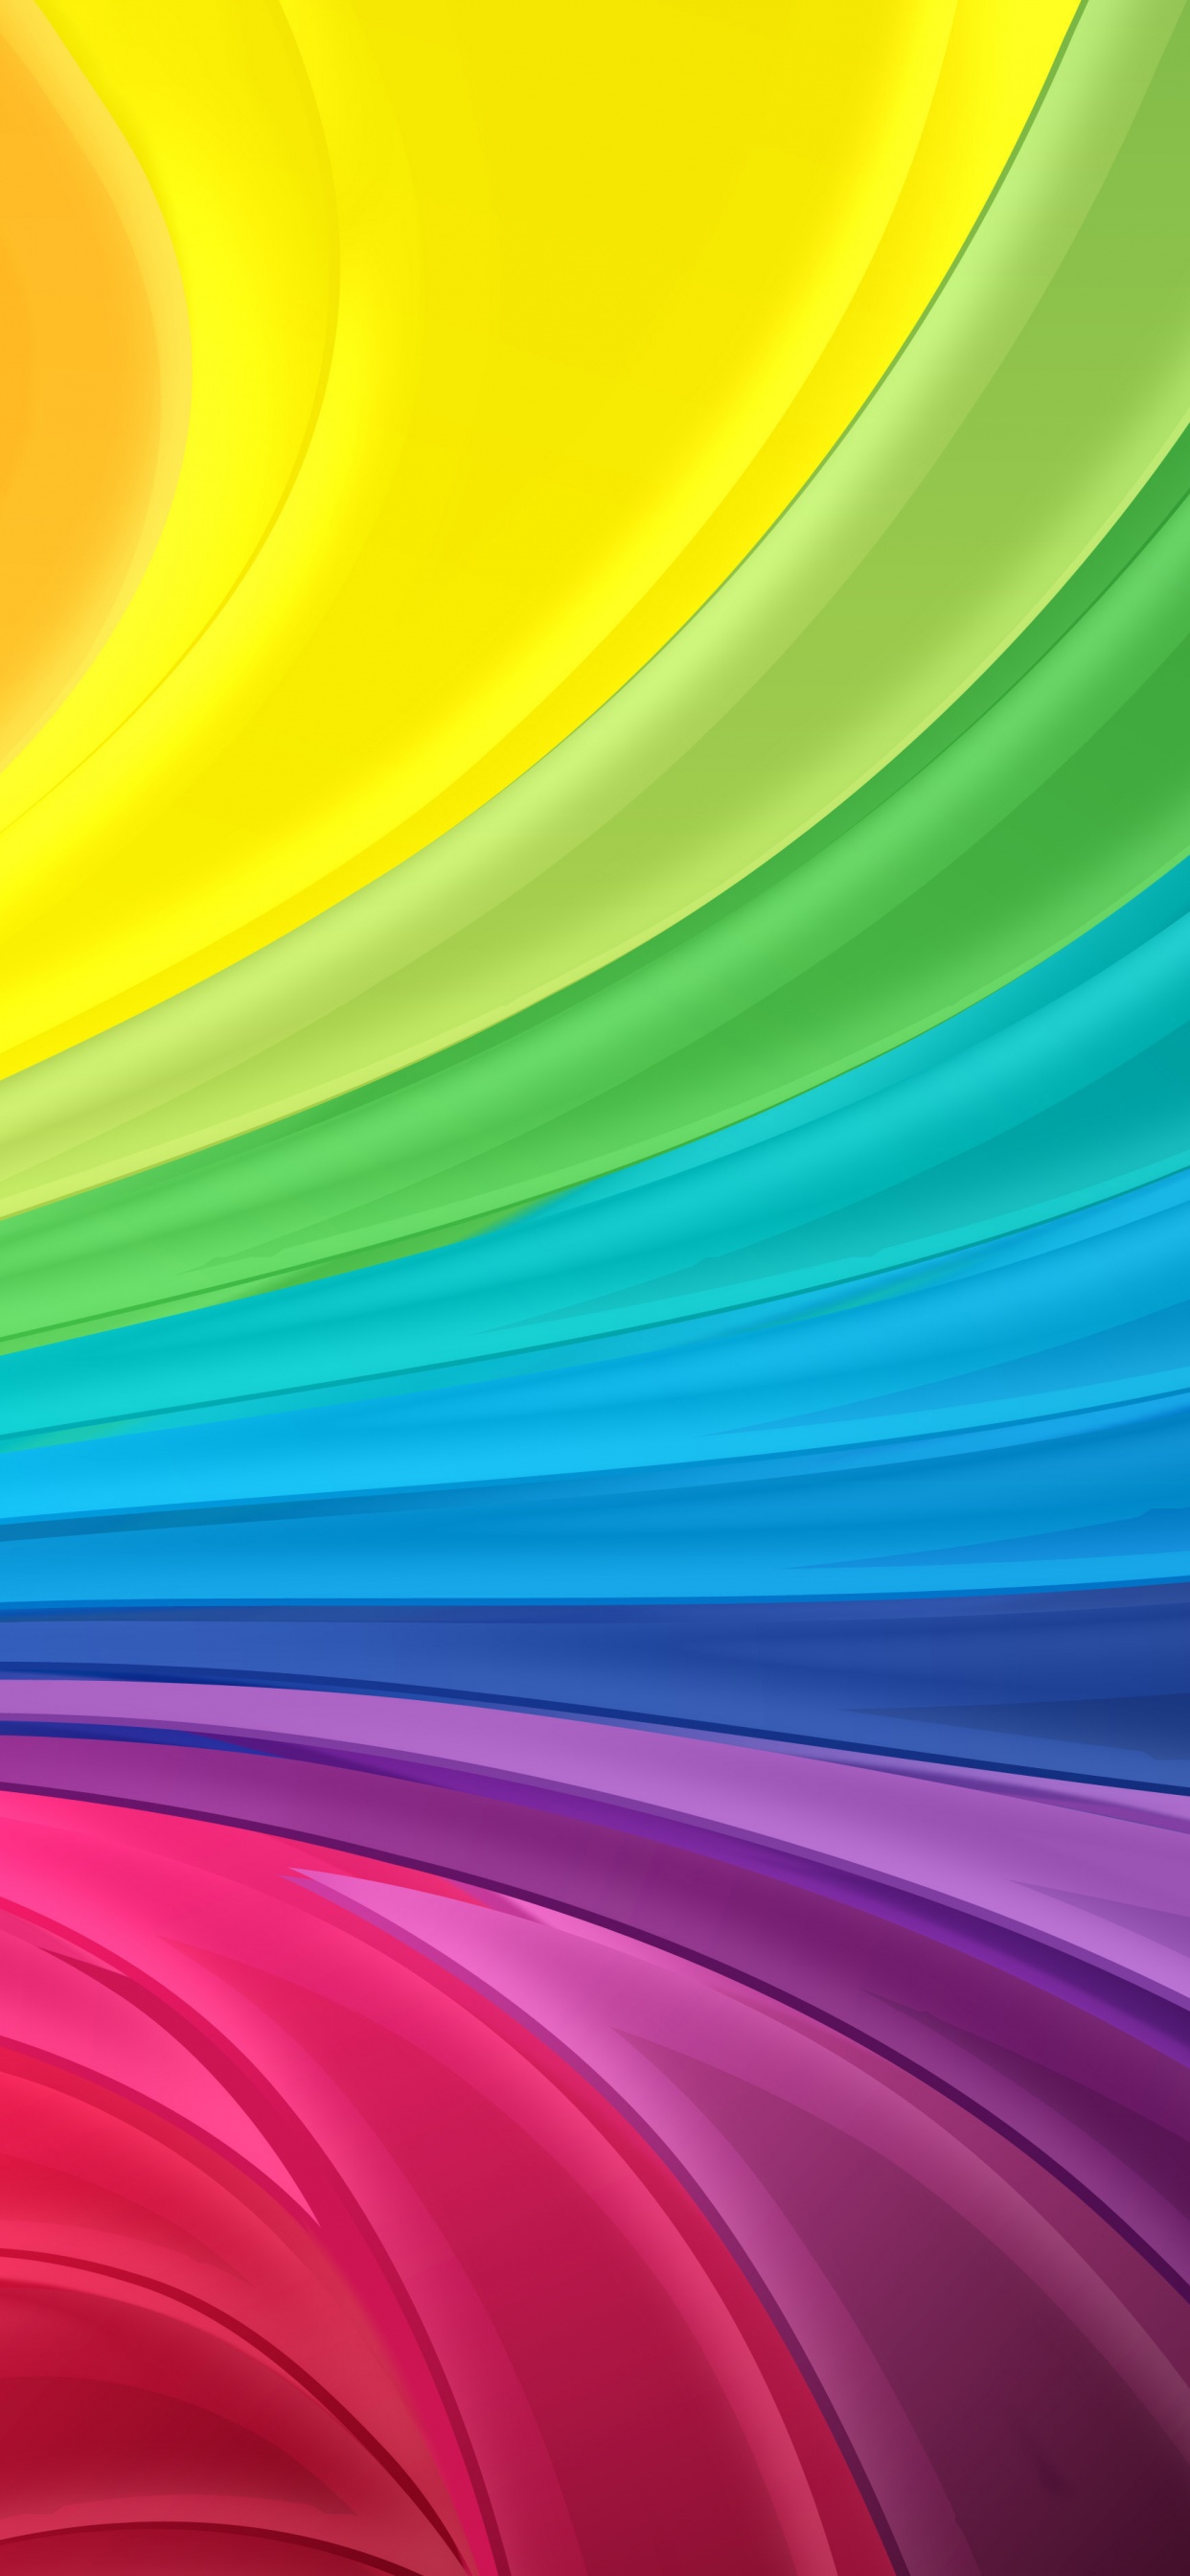 Rainbow Wallpaper For Iphone